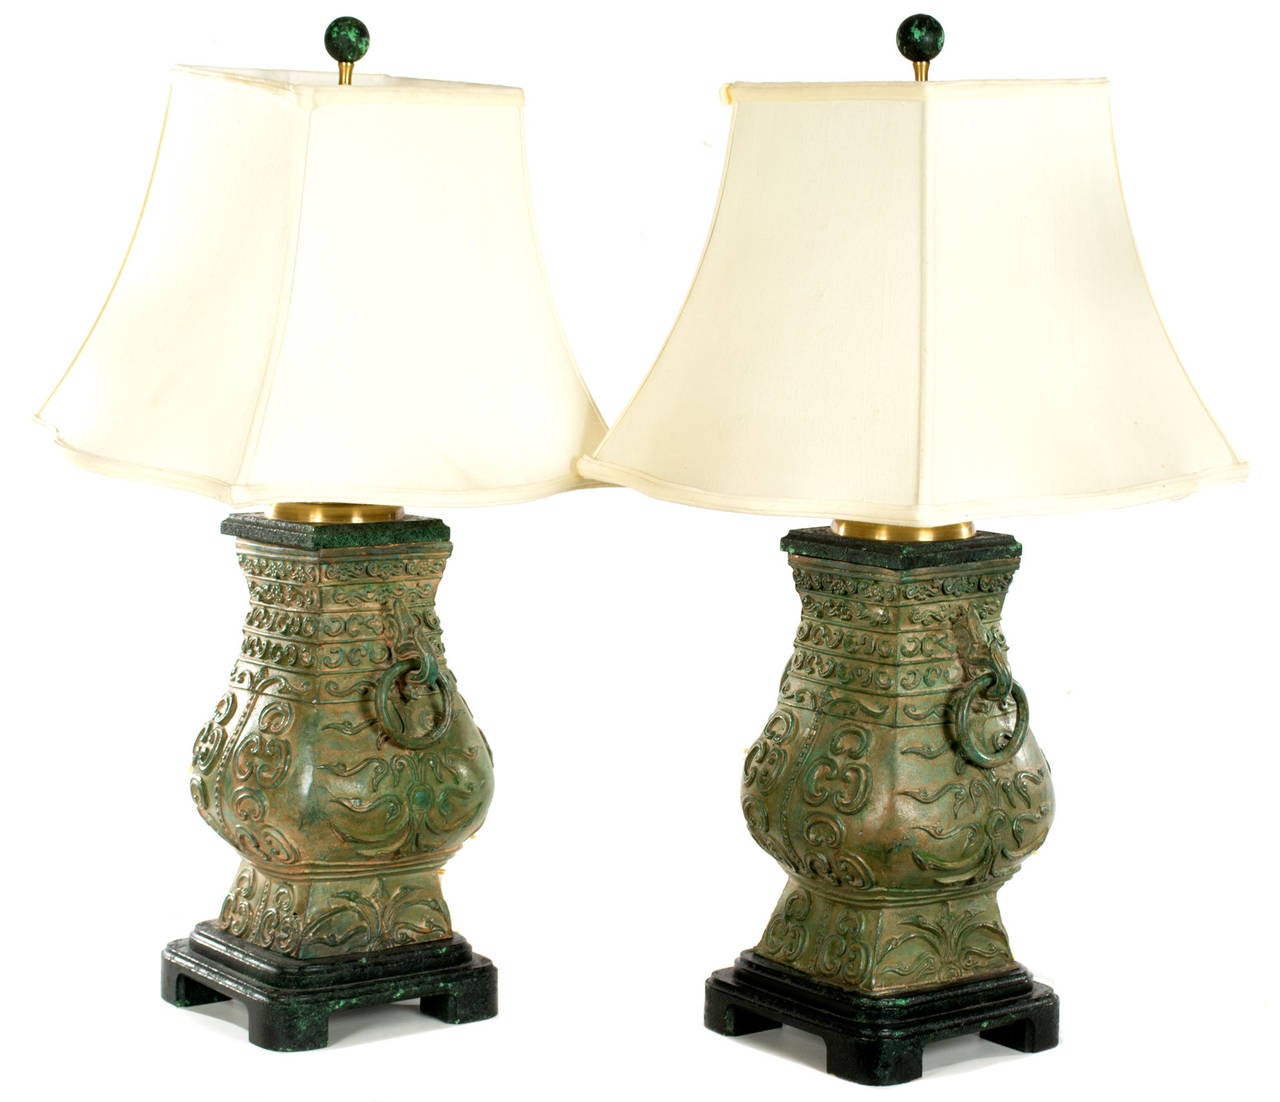 Two midcentury lamps in the shape of ancient Chinese temple urns with giltwood tops and ebonized wood pedestals.